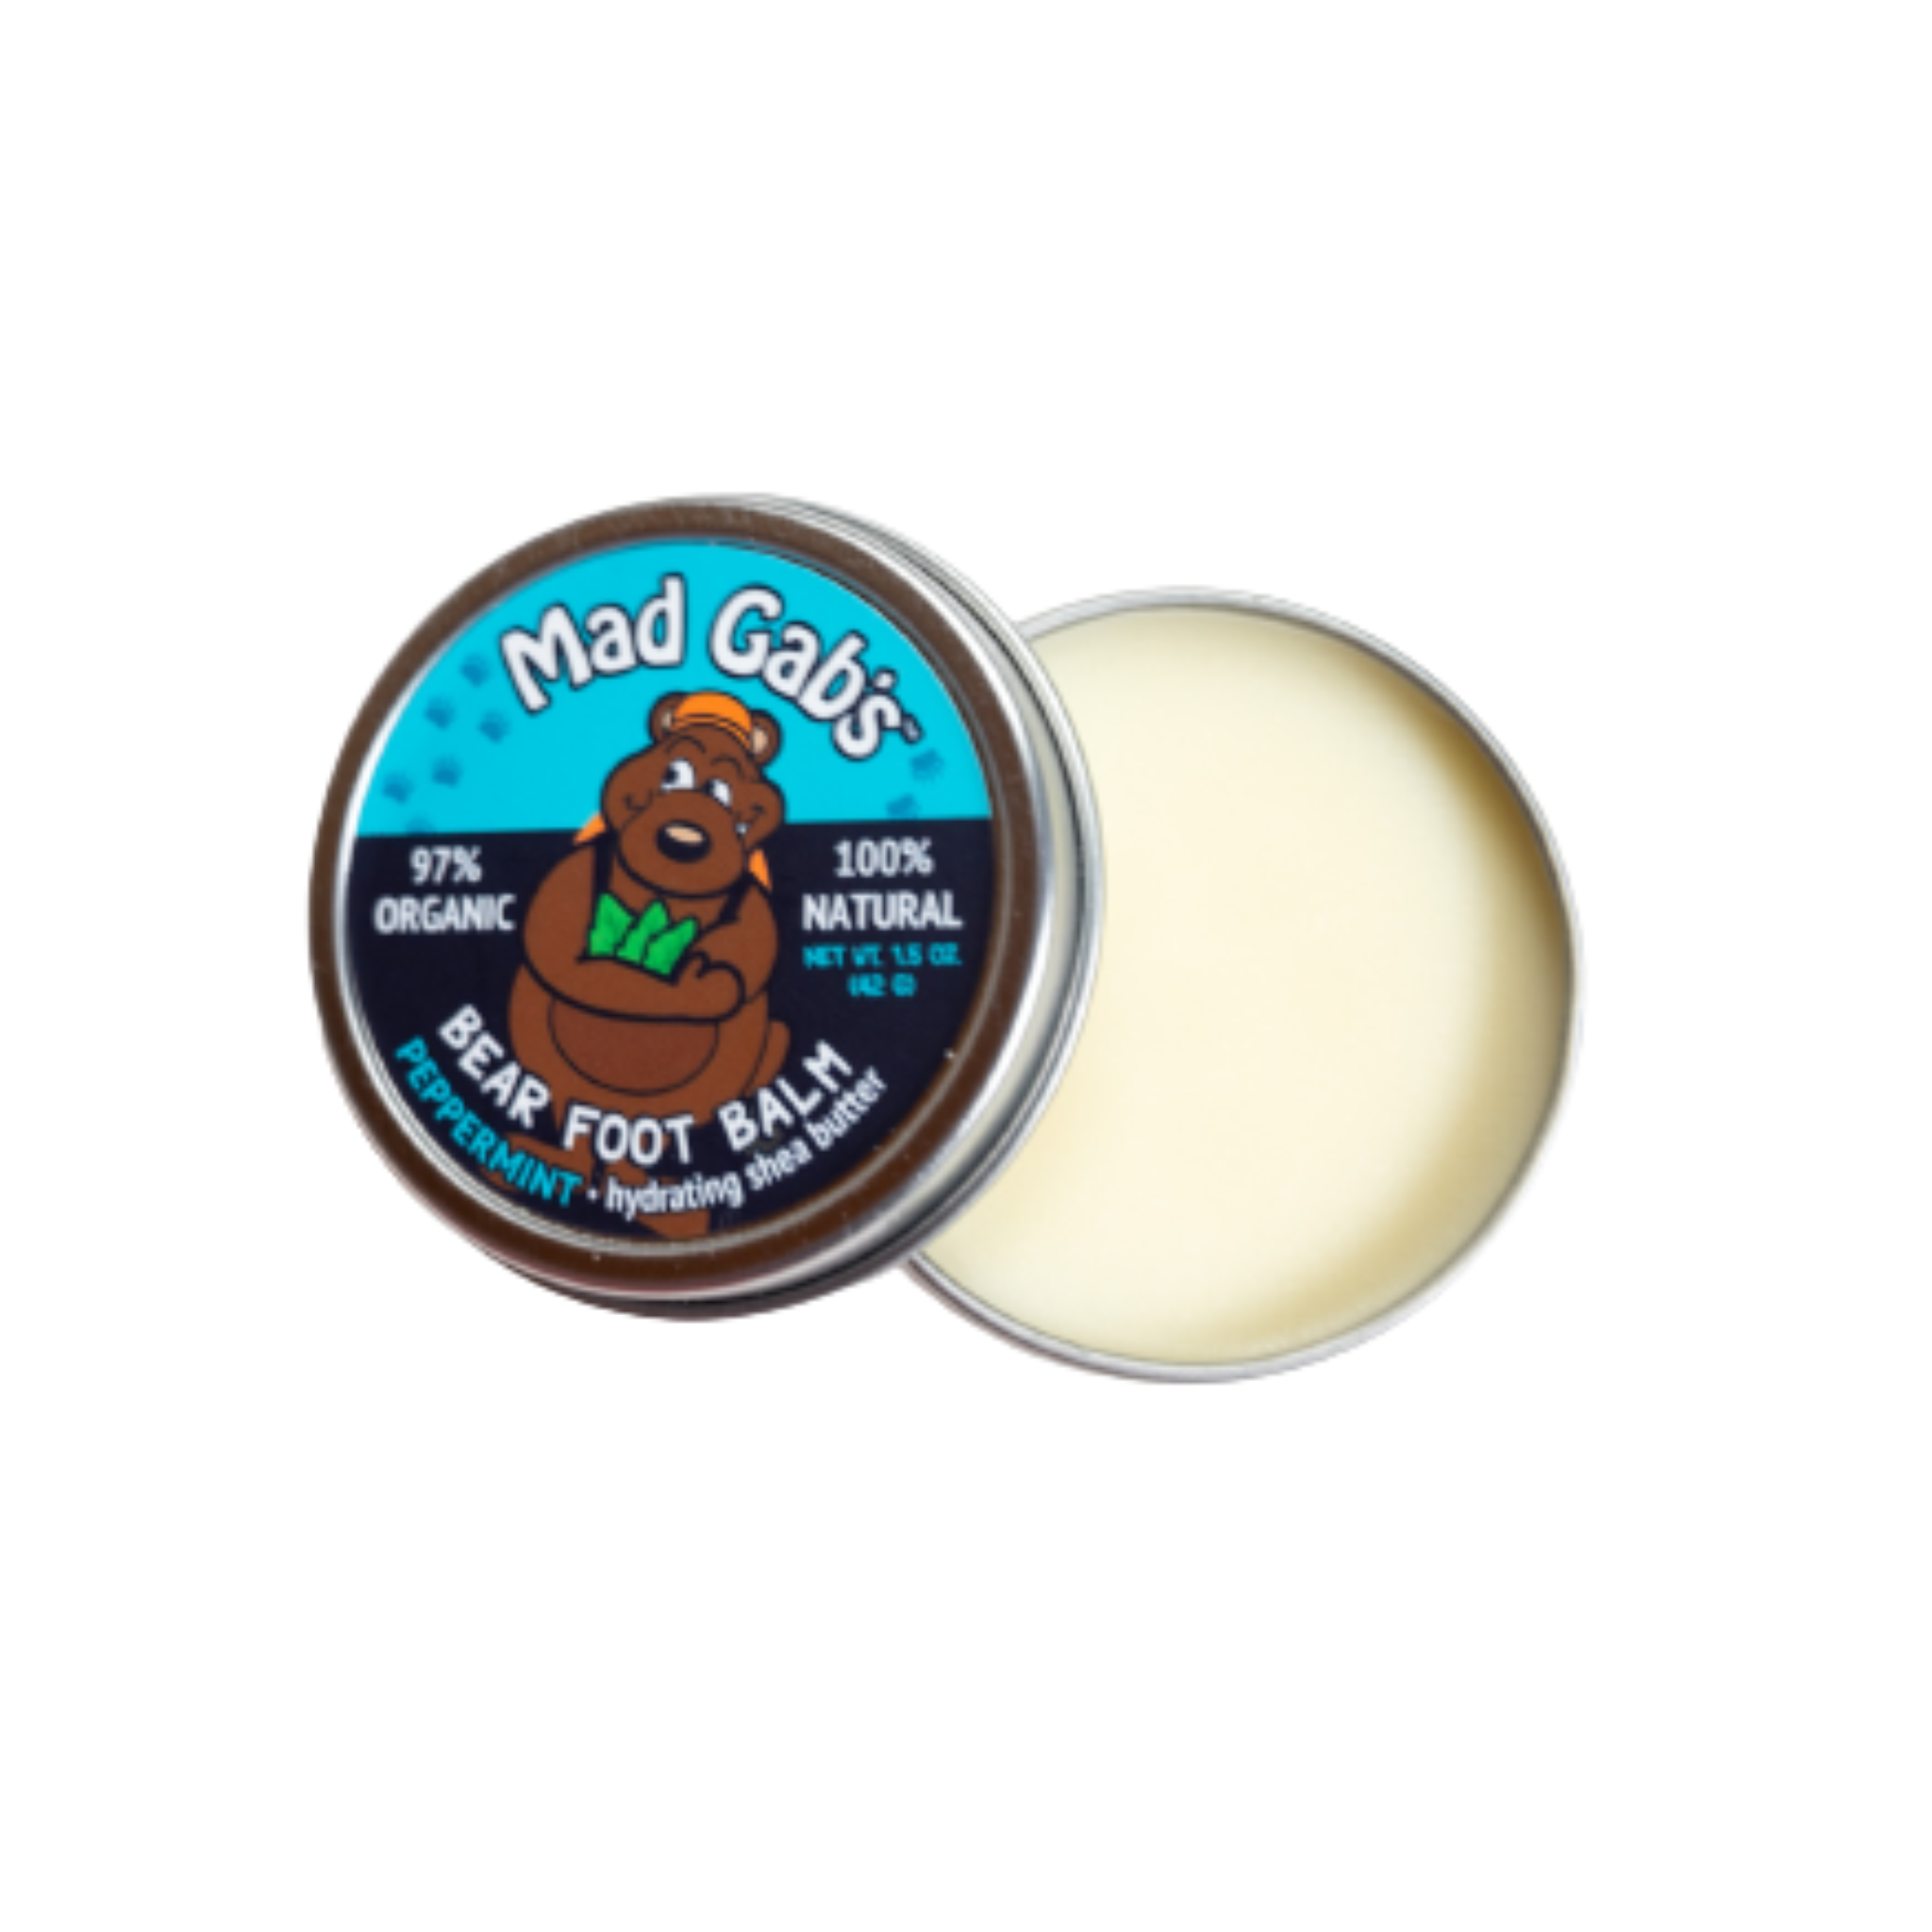 Mad Gab's Organic and Natural Peppermint Bear Foot Balm for Dry